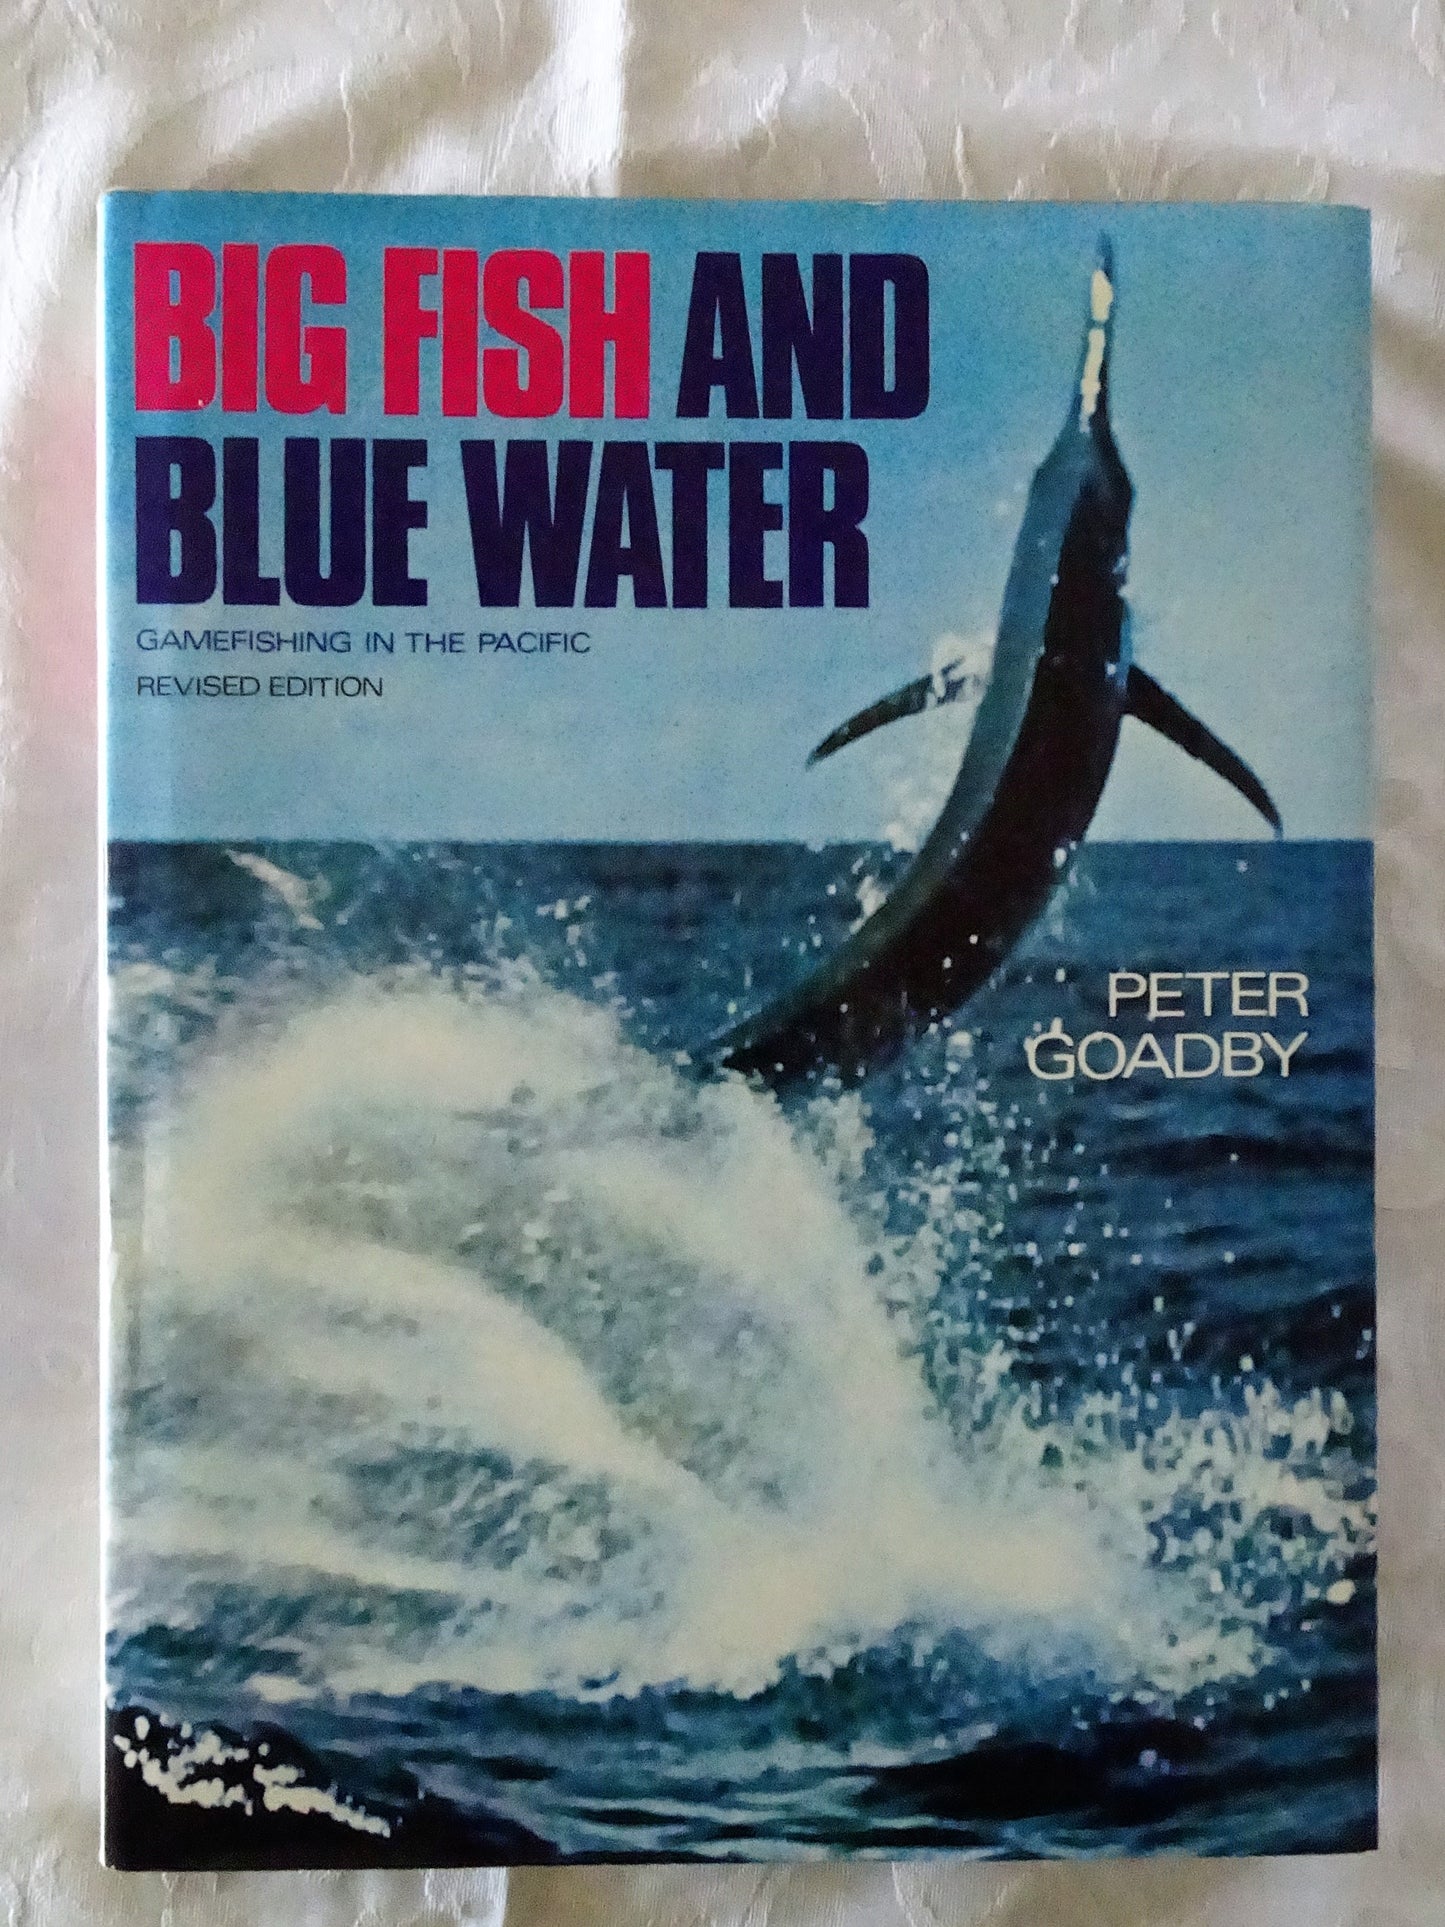 Big Fish and Blue Water by Peter Goadby